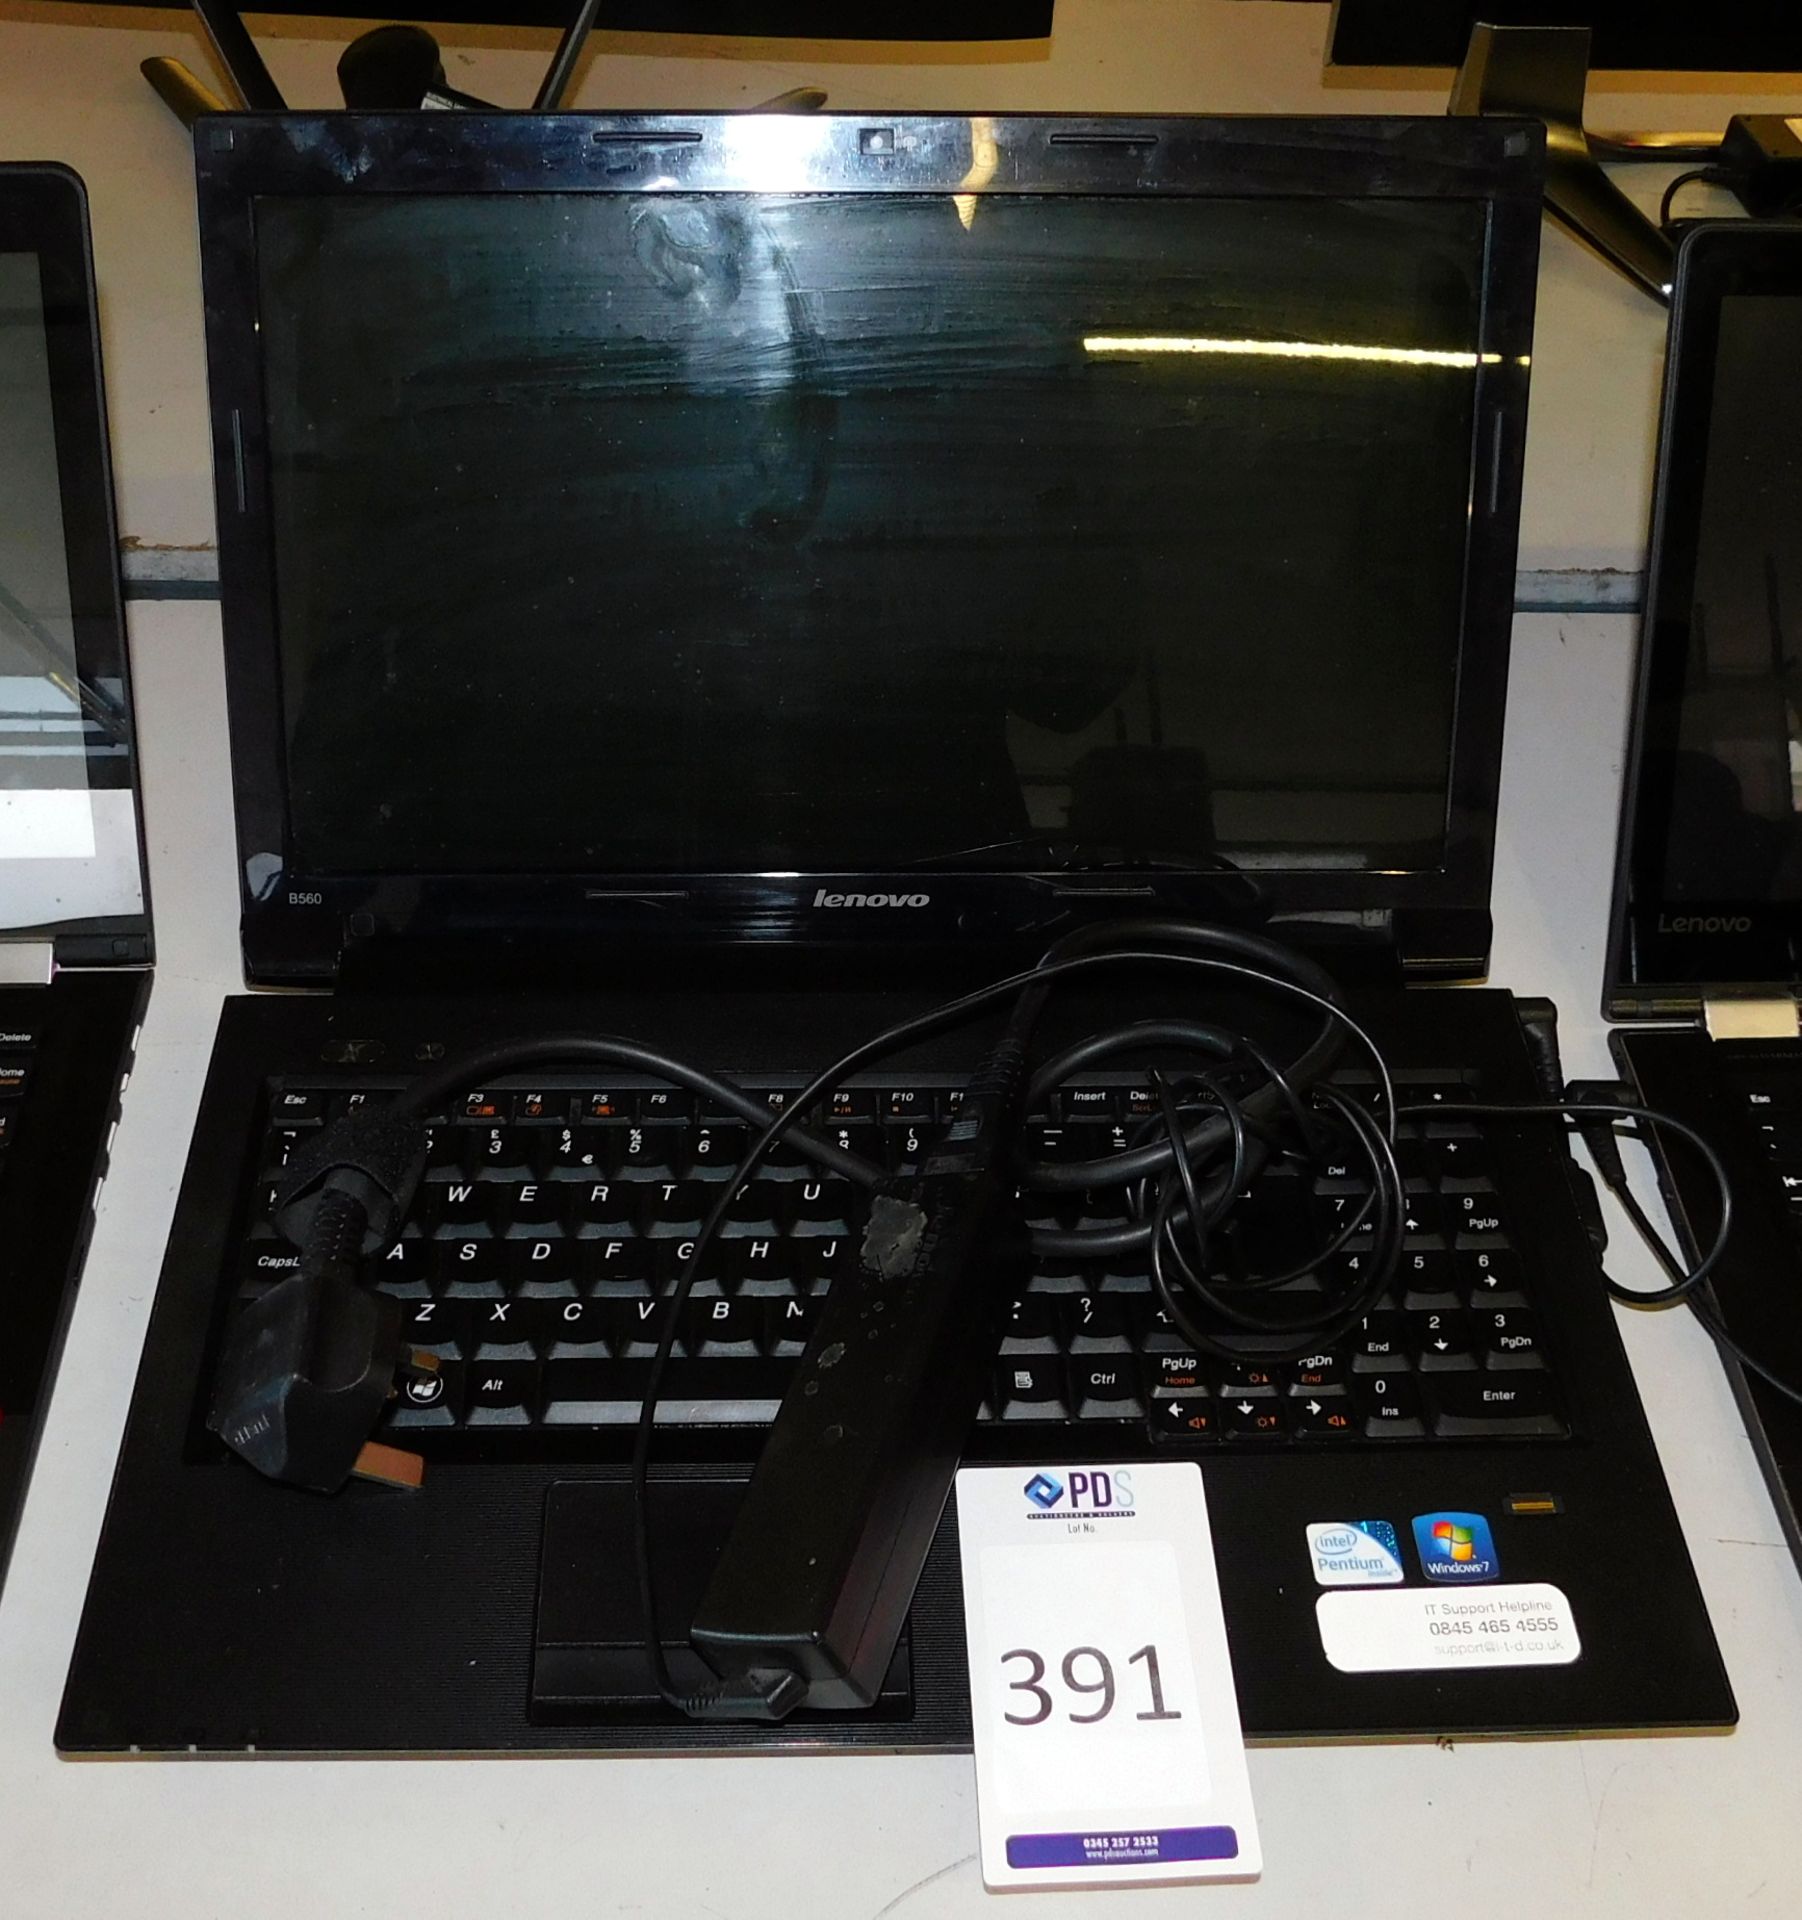 Lenovo B560 Laptop (No HDD) (Located Stockport – See General Notes for Full Address)